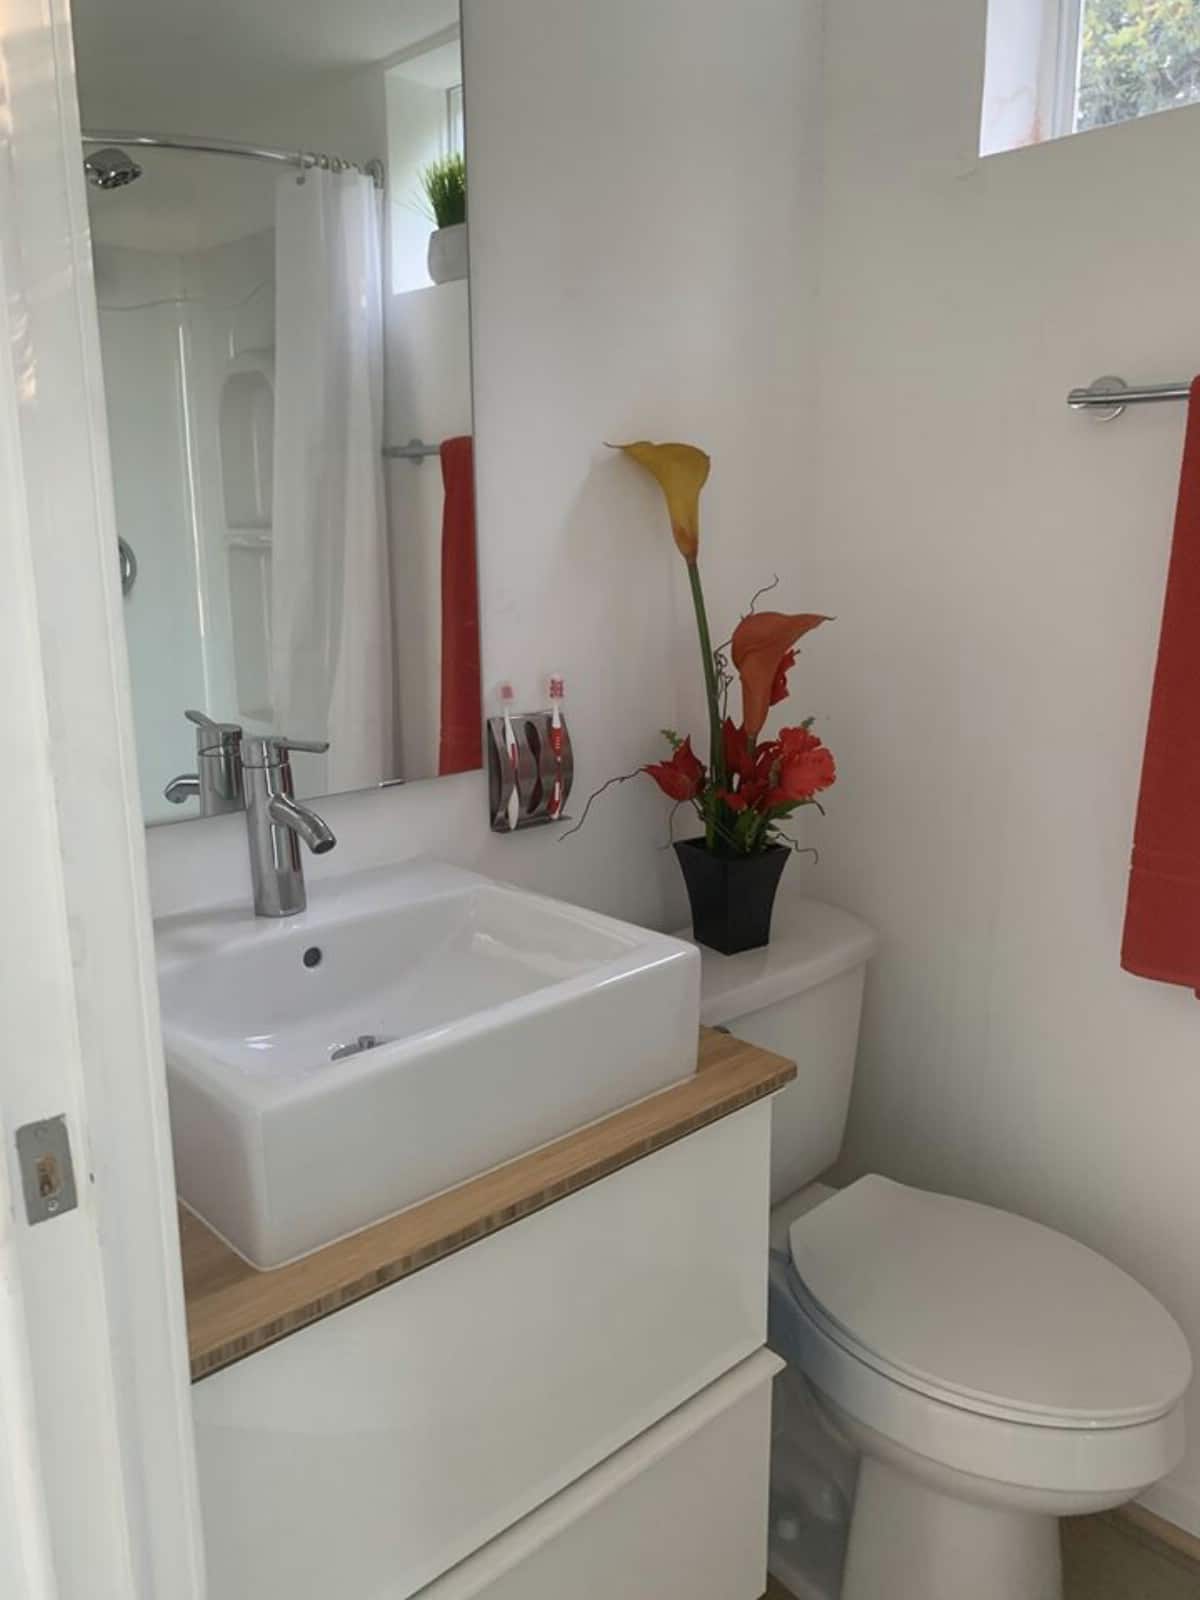 Modern sink and toilet with red accents in tiny home